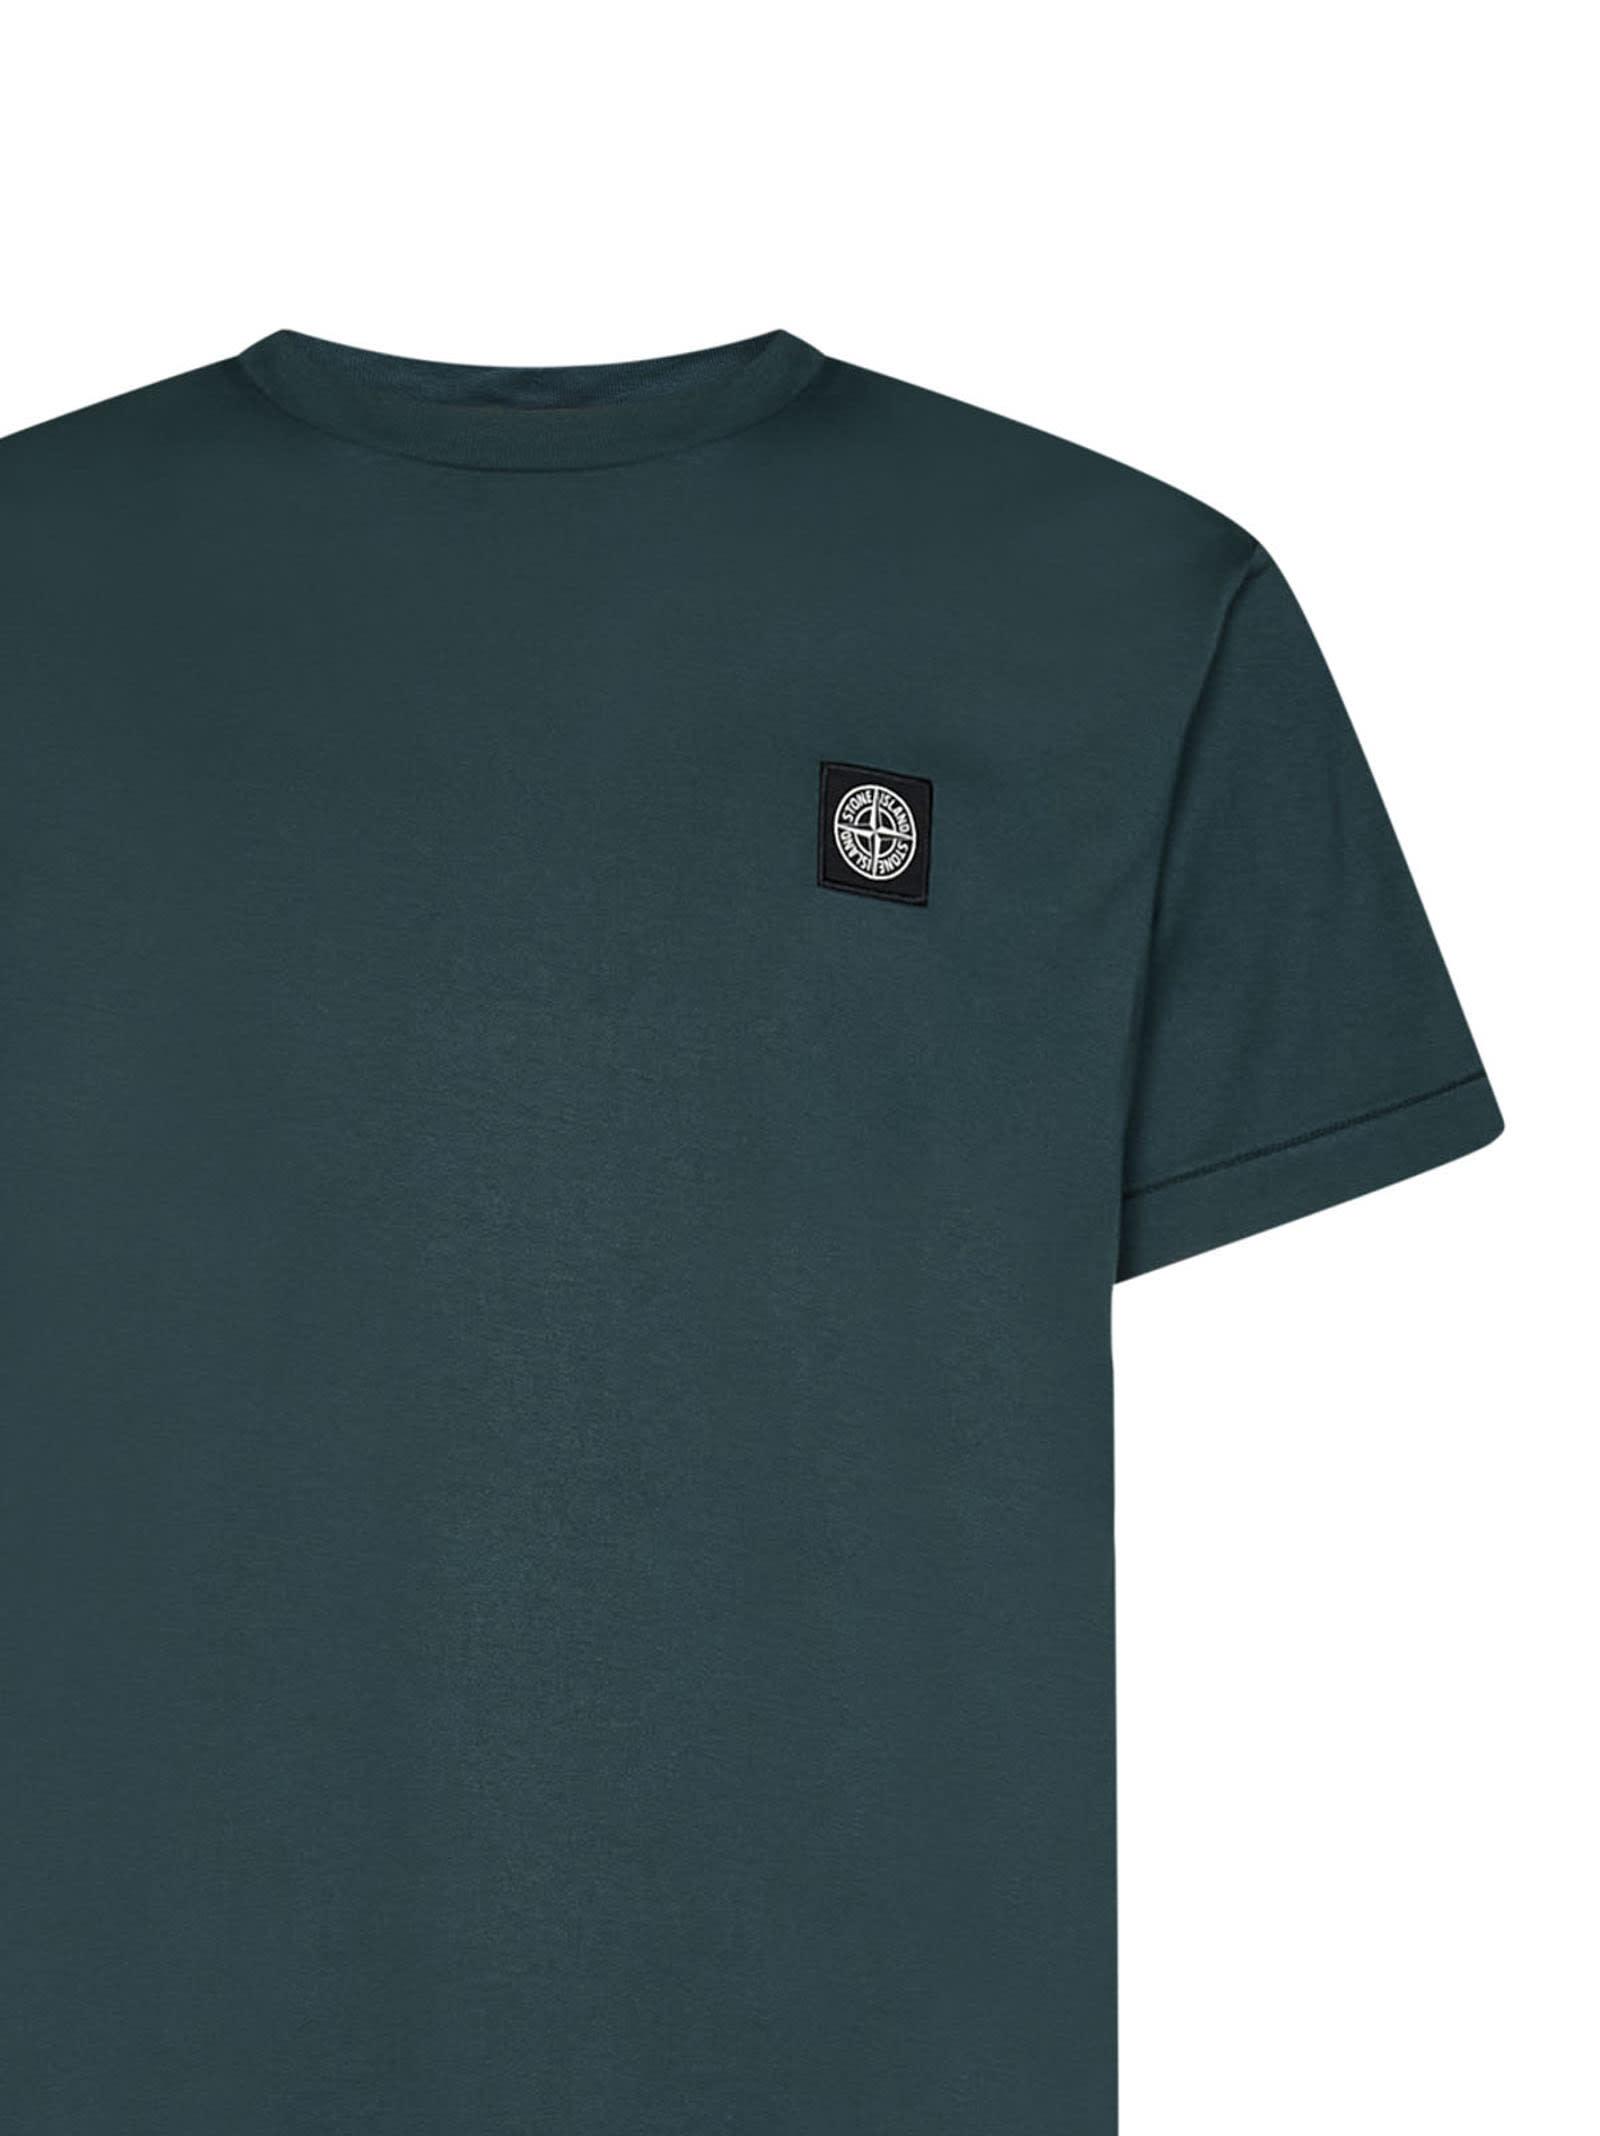 Stone Island T-shirt in Green for Men | Lyst